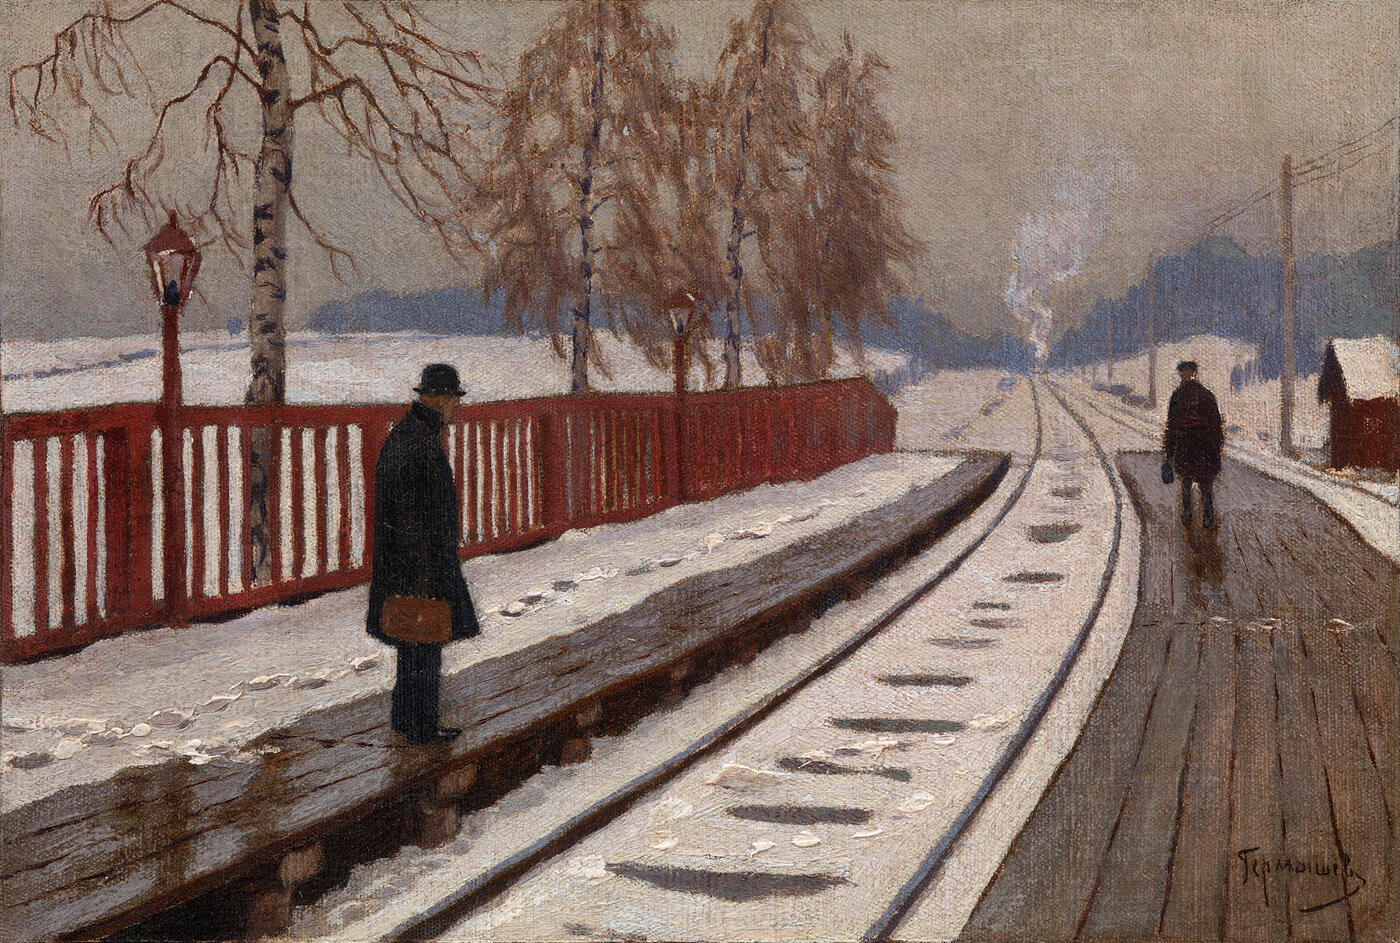 Winter Street Scene and On the Platform, two works